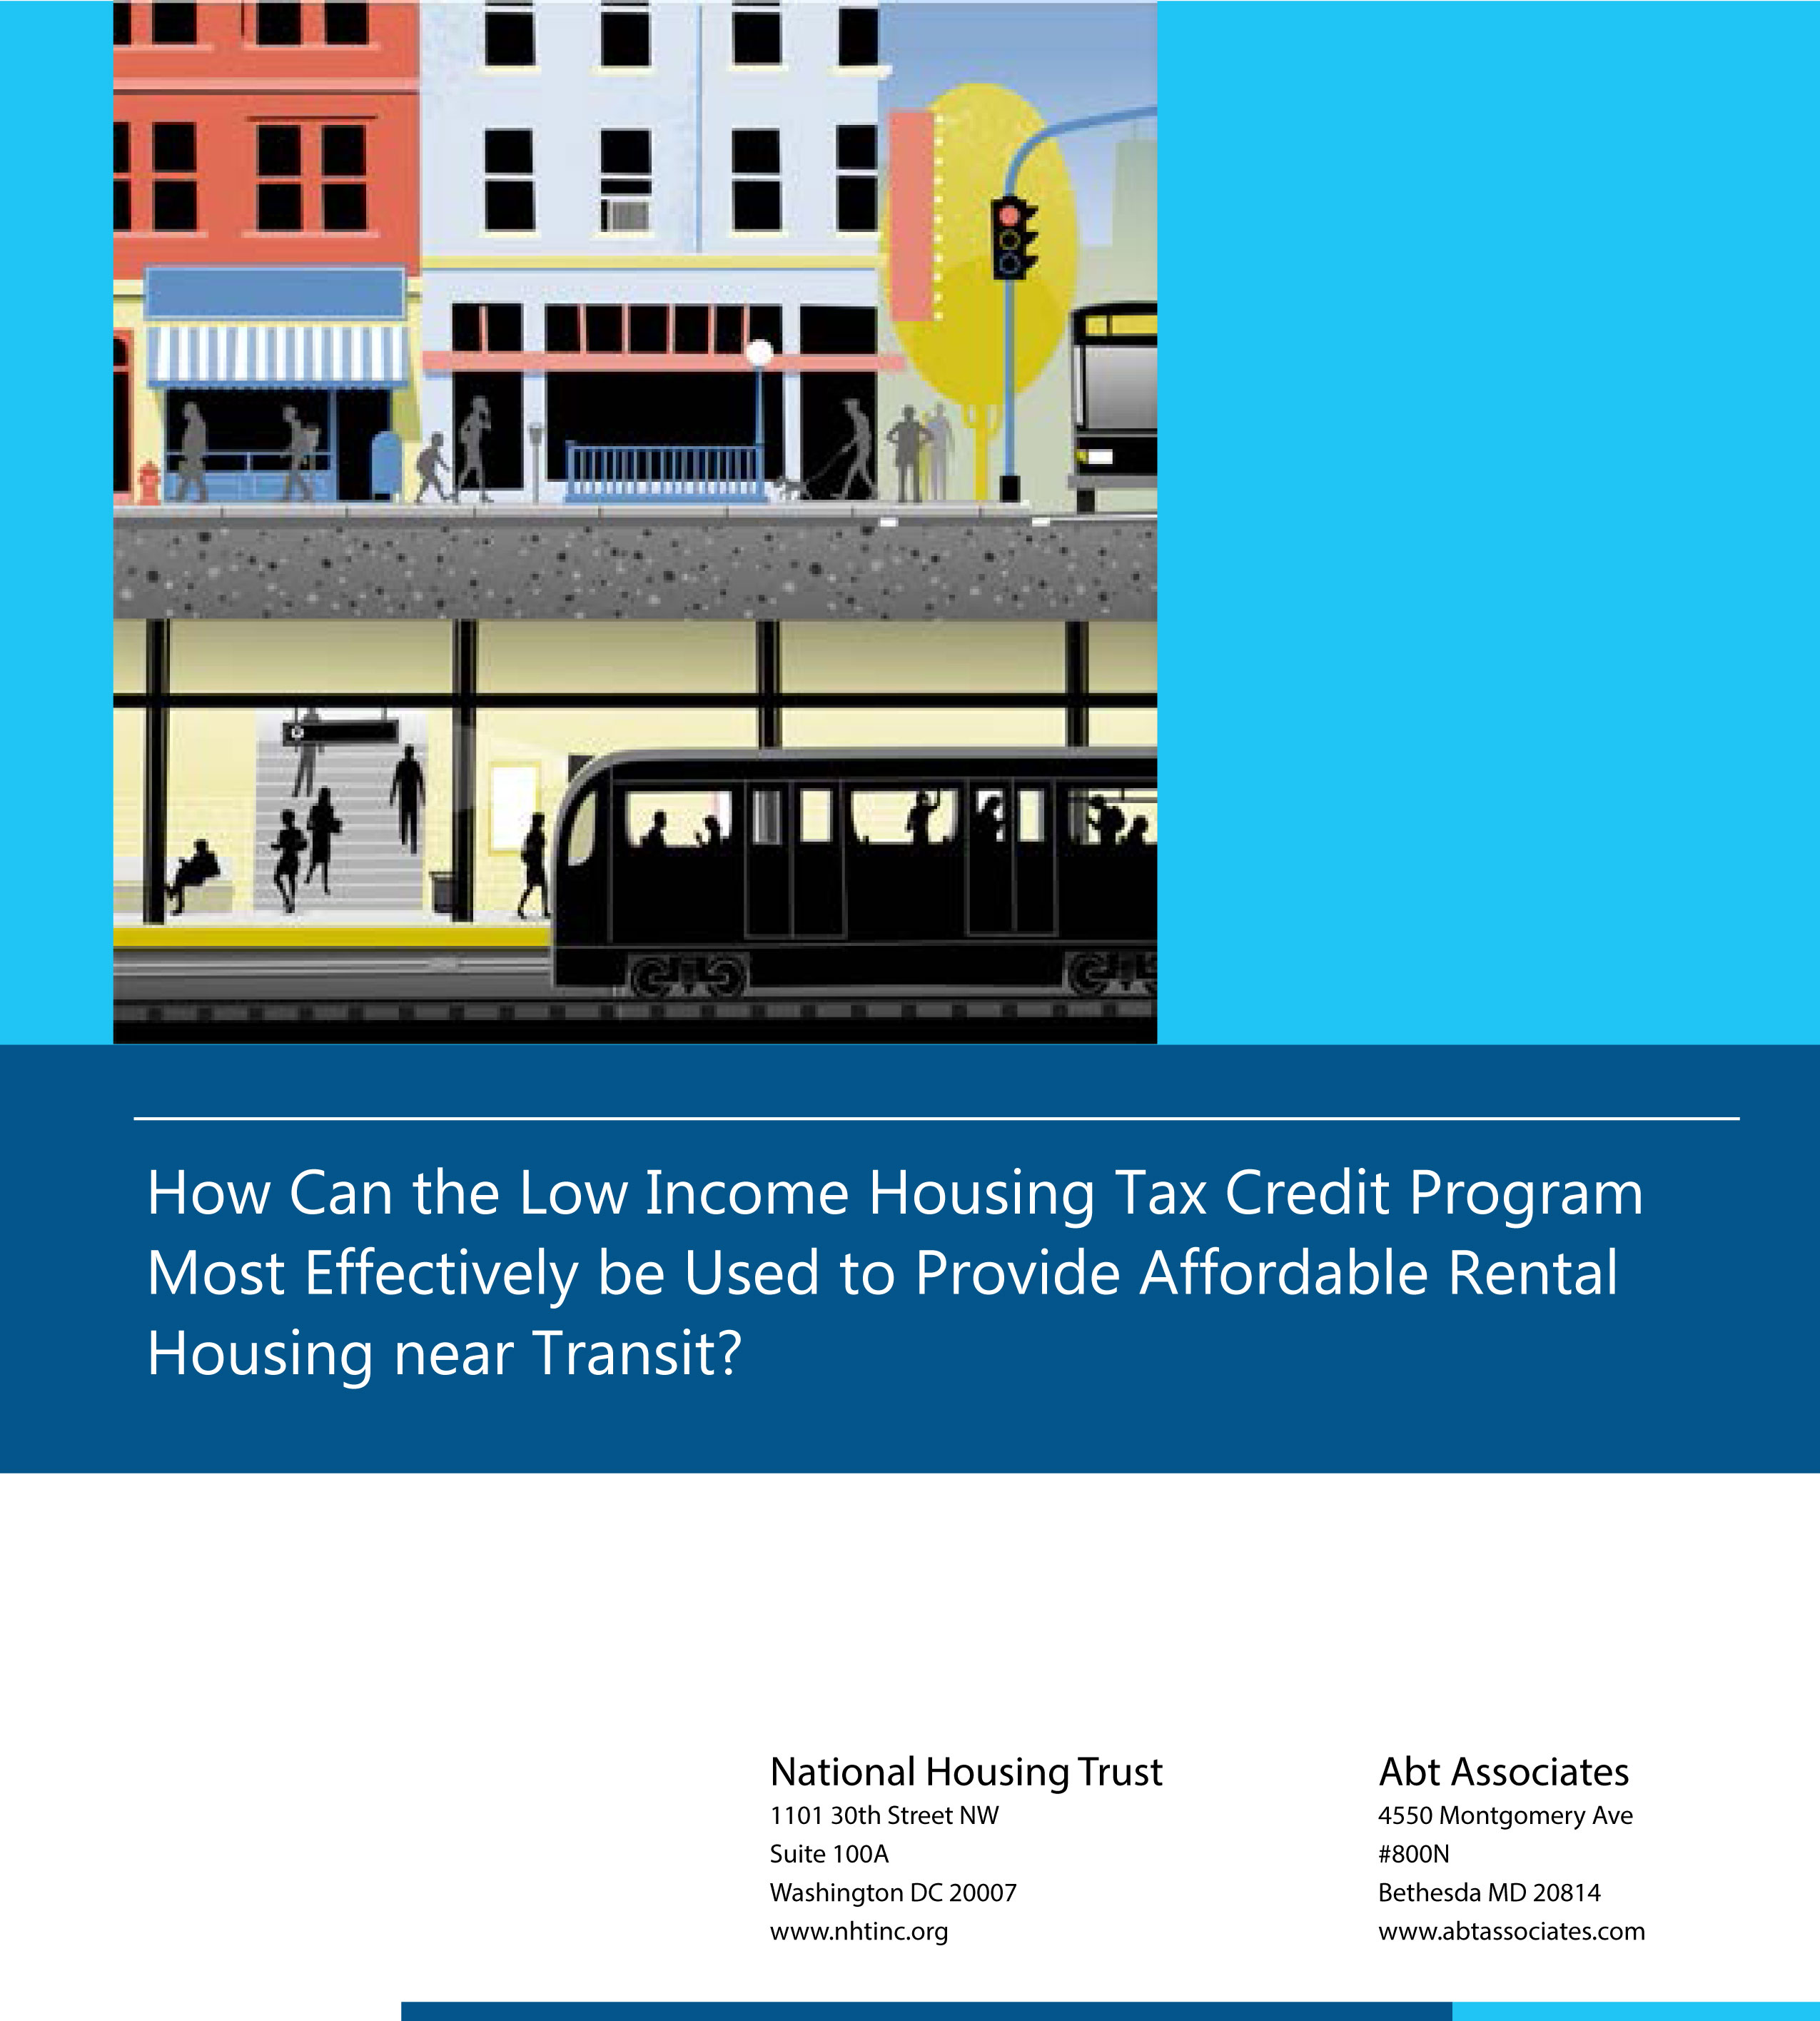 How can LIHTC help provide affordable rental housing near transit